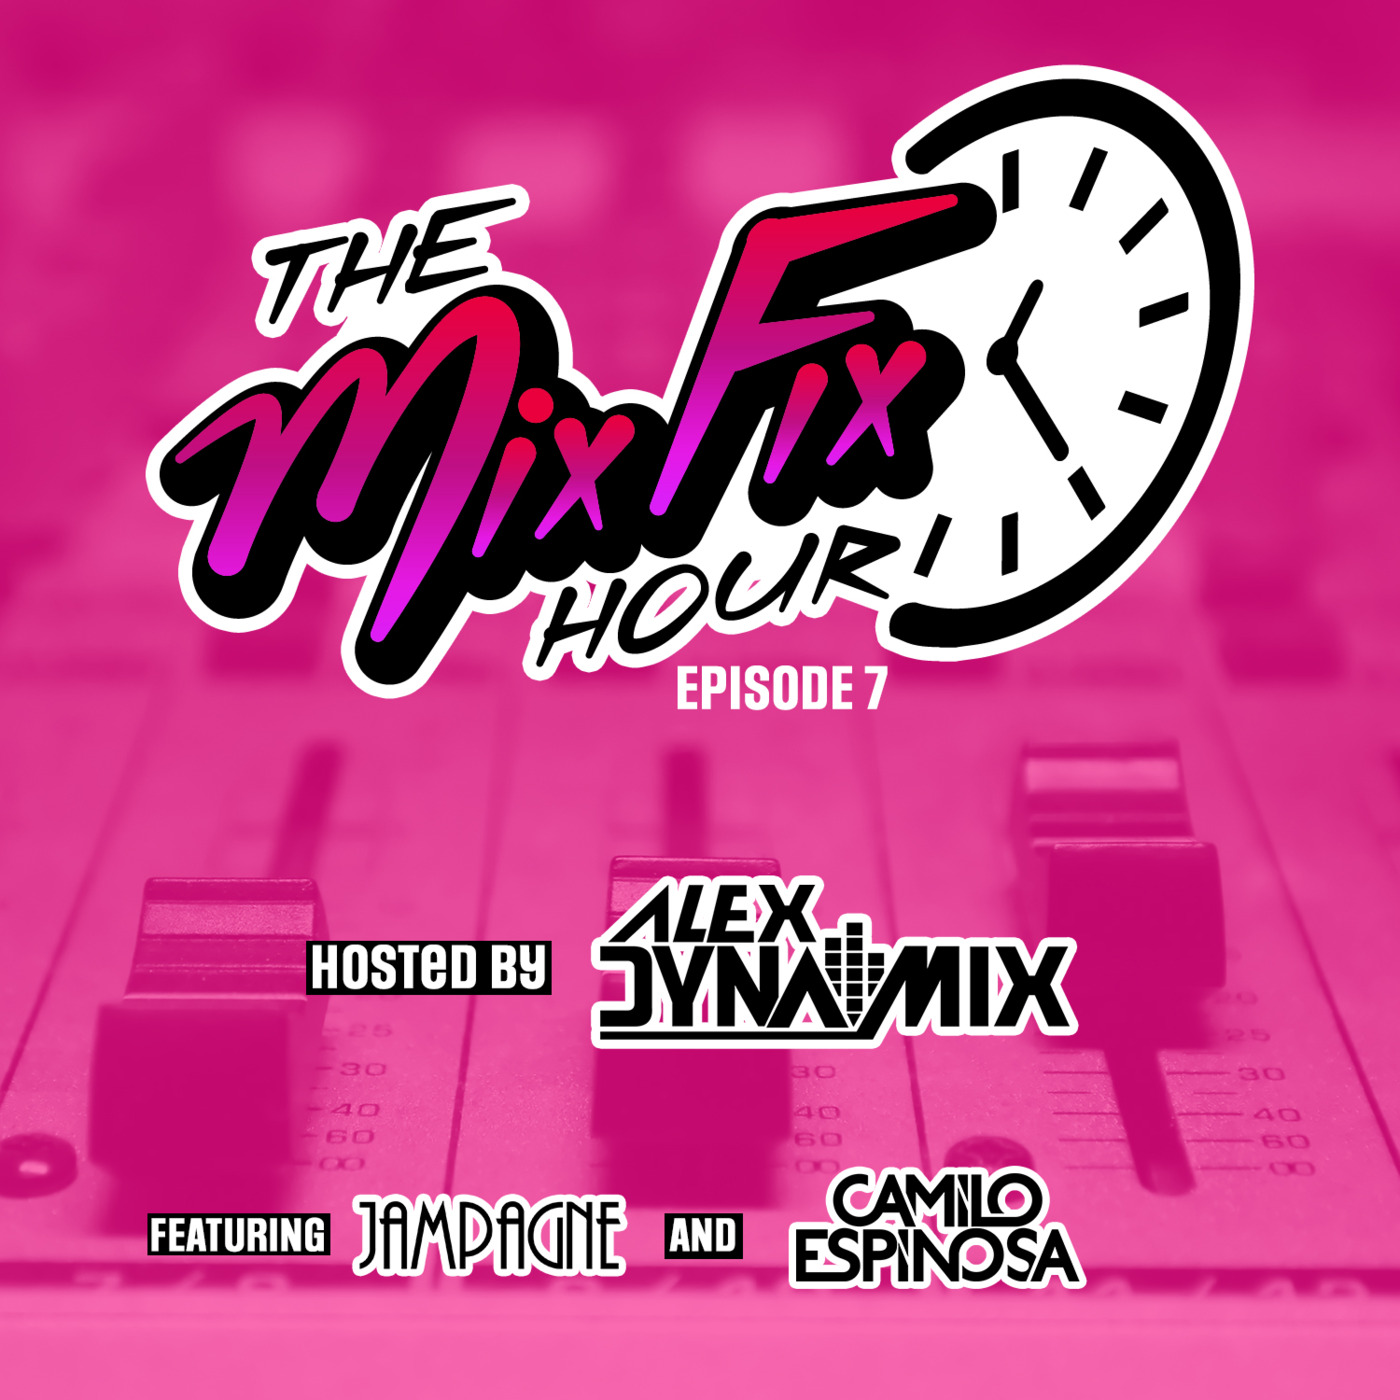 The Mix Fix Hour Hosted By Alex Dynamix - Episode 7 Feat. Jampagne & Camilo Espinosa